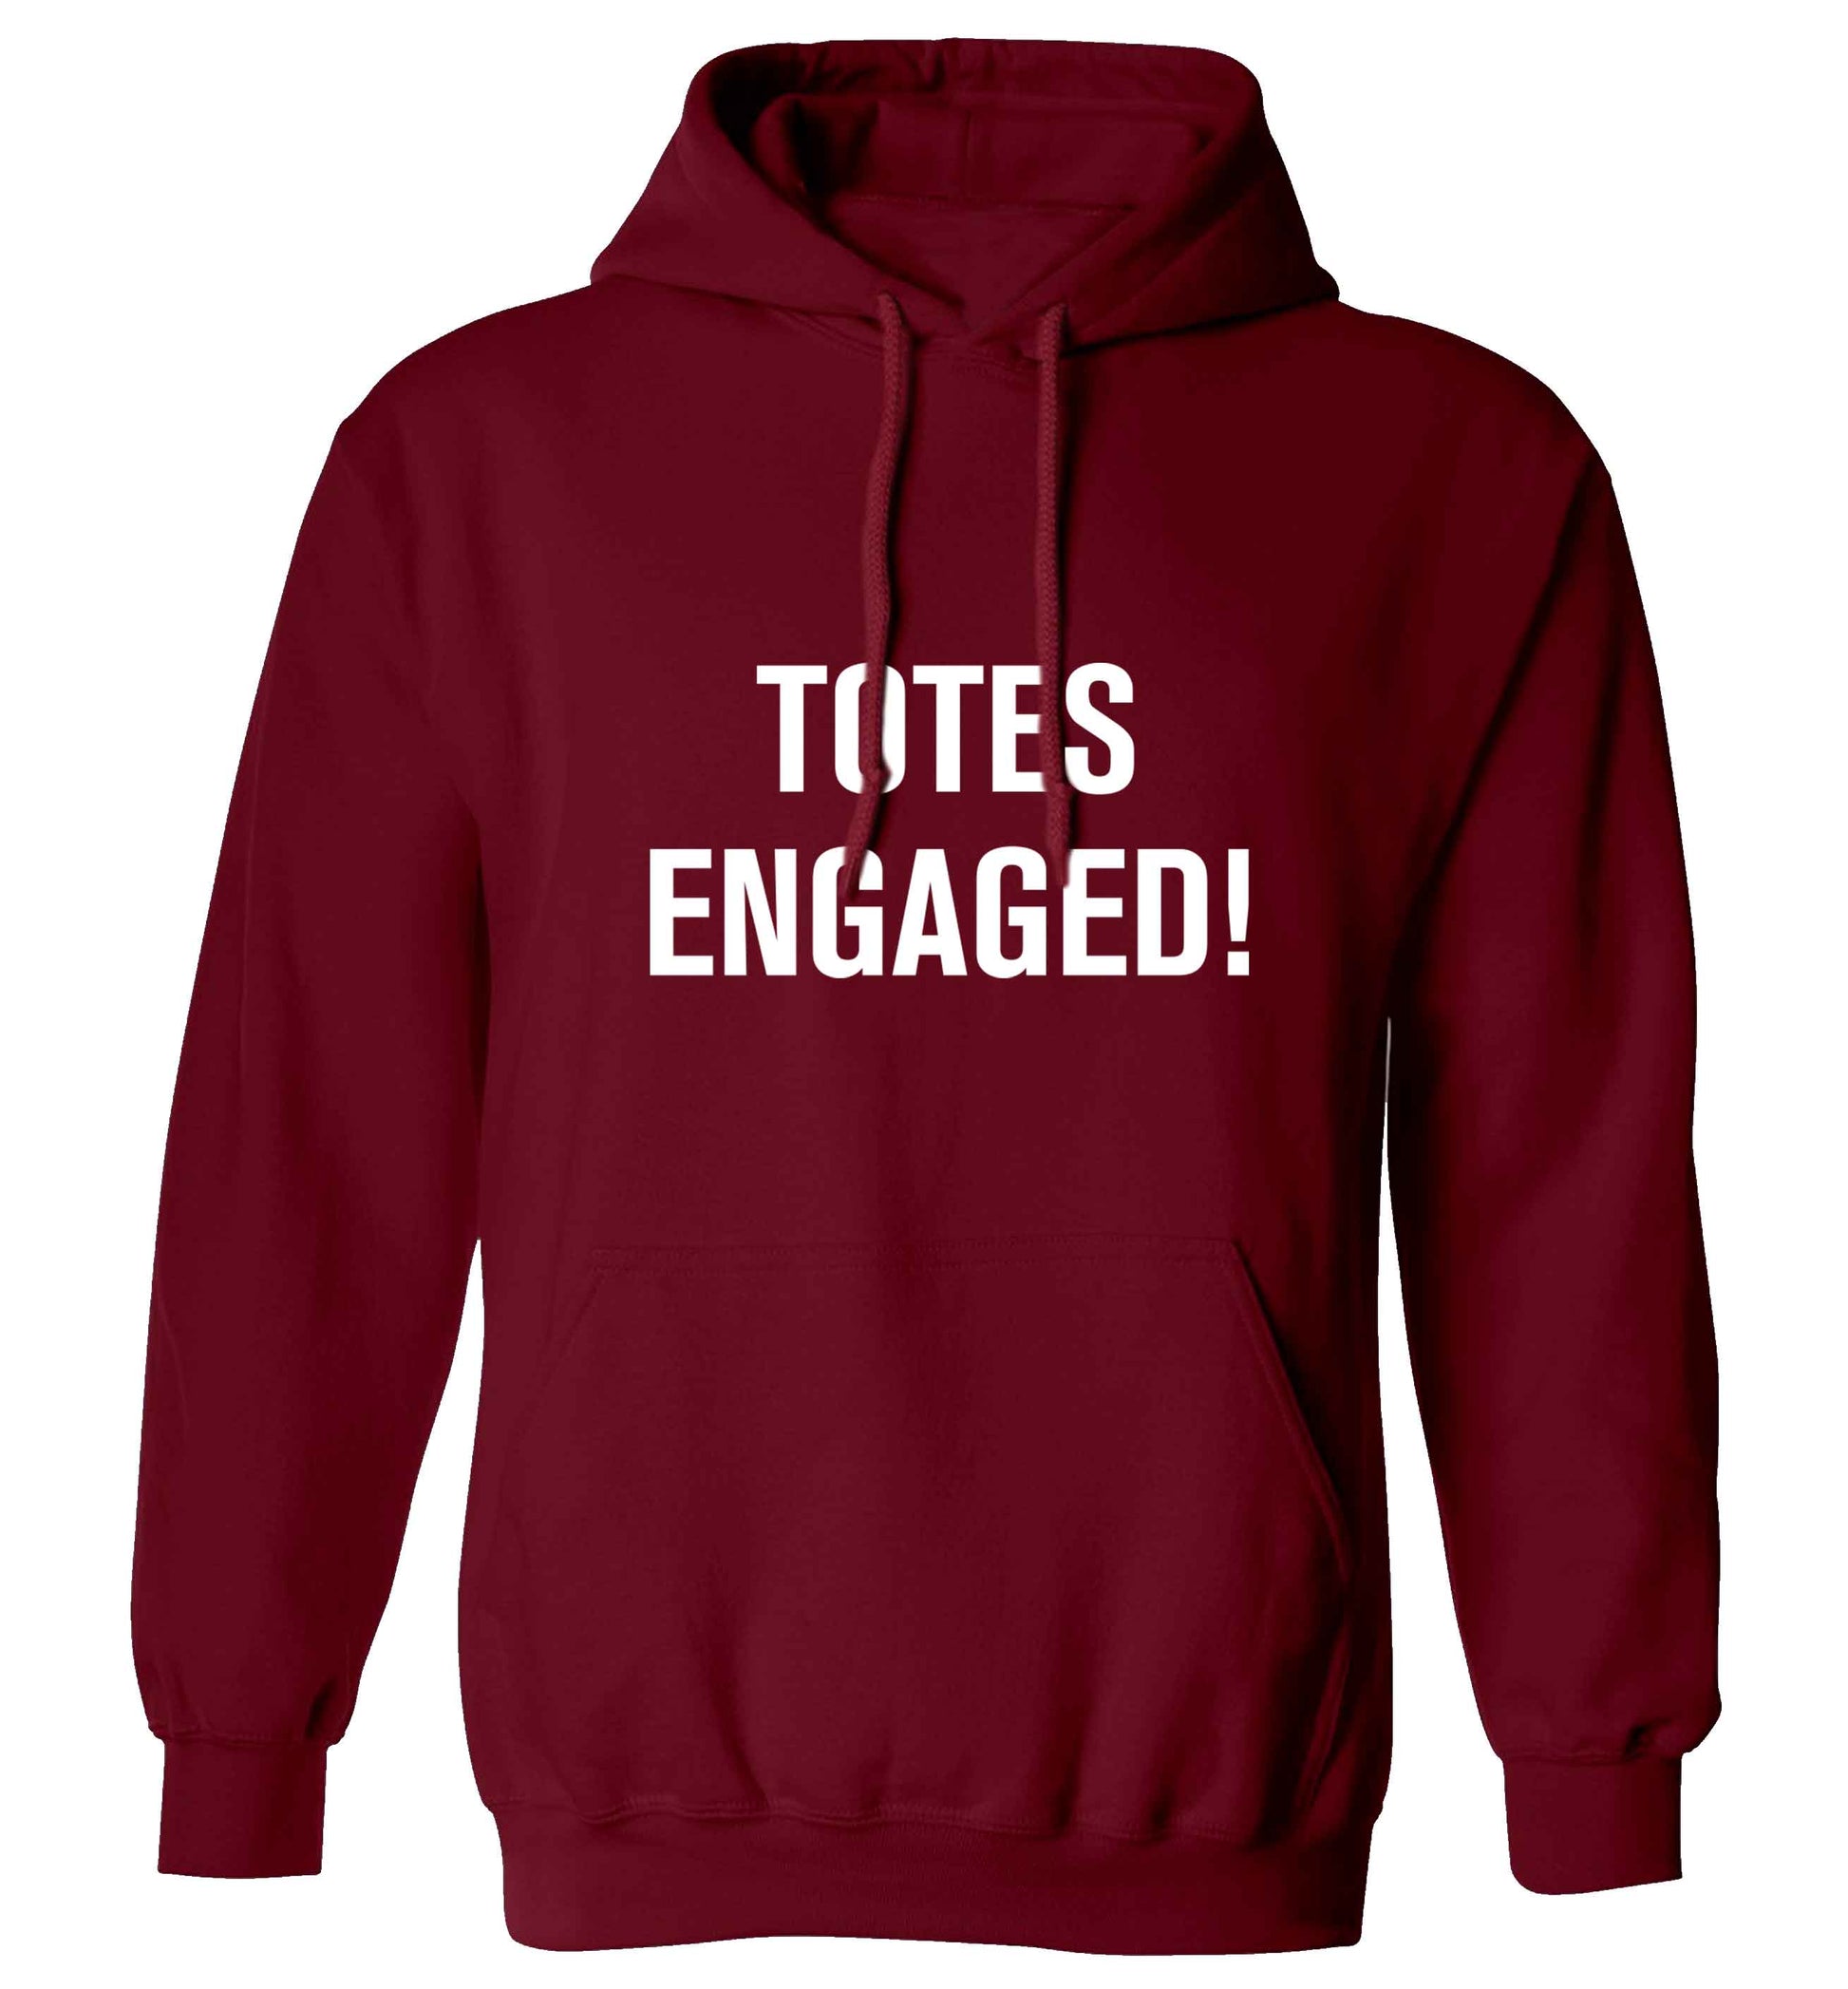 Totes engaged adults unisex maroon hoodie 2XL